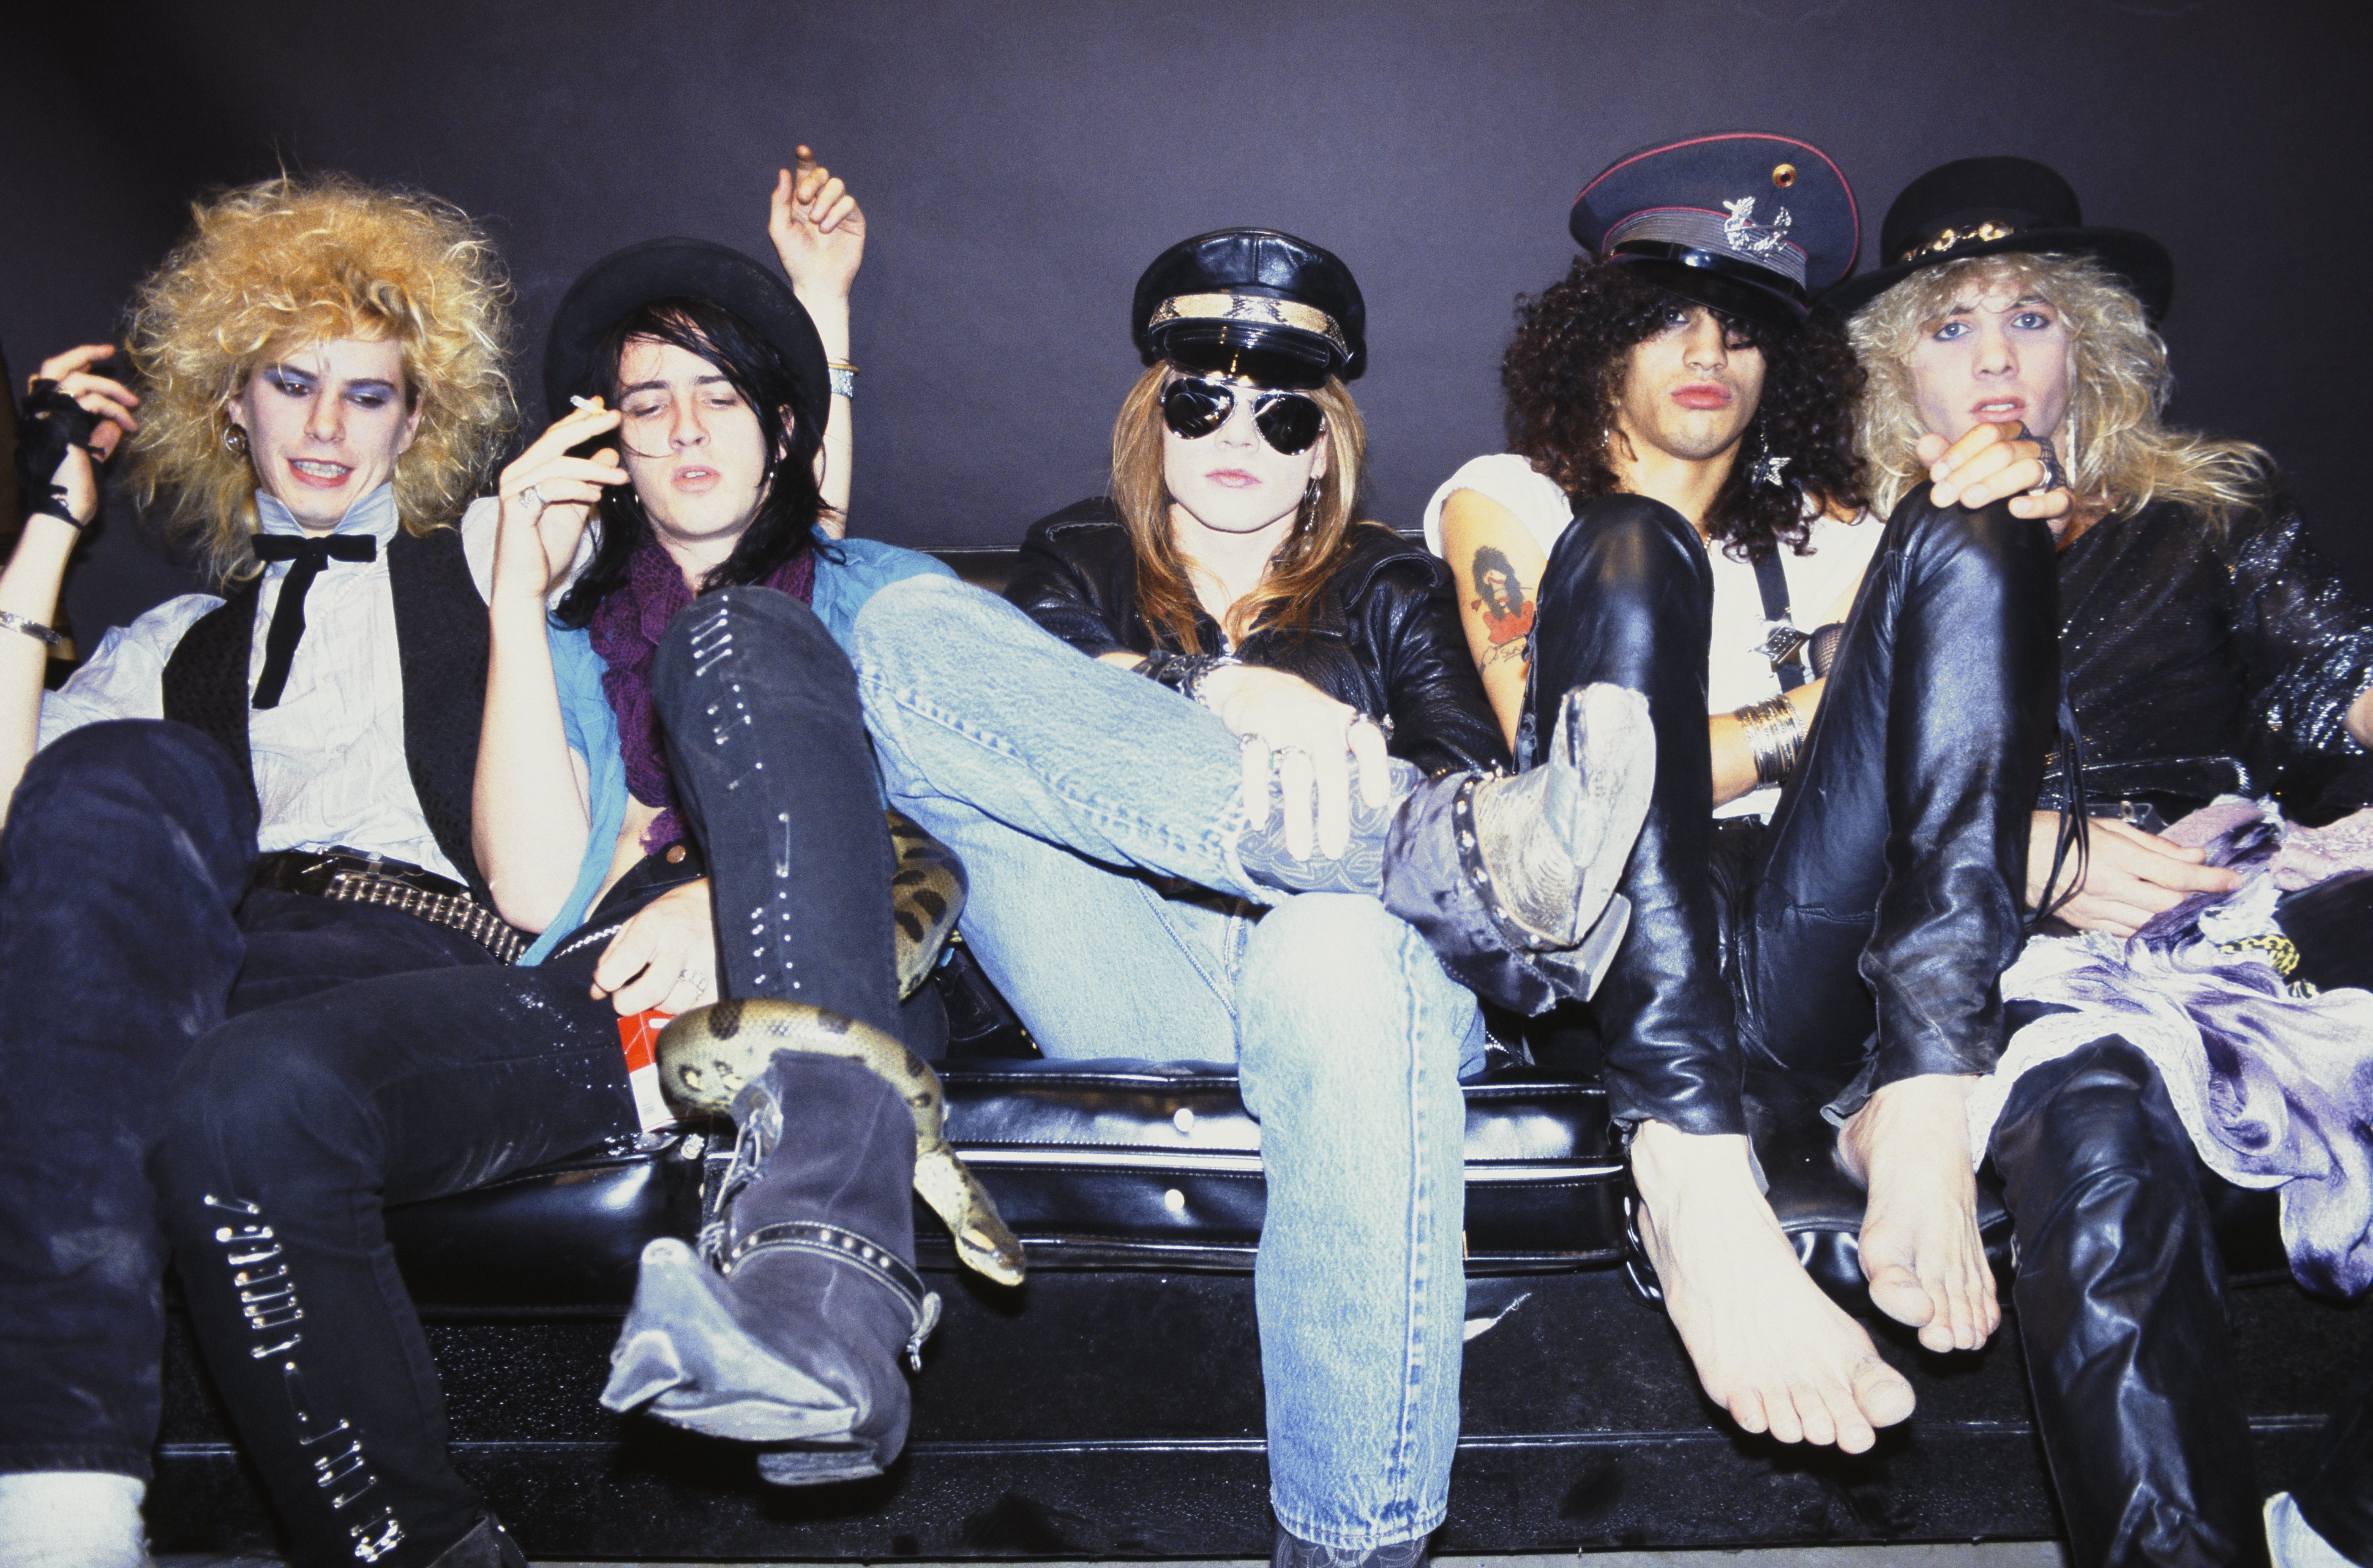 Are You a Enough of a Rich Asshole to Buy this $999 Guns N' Roses Box Set?